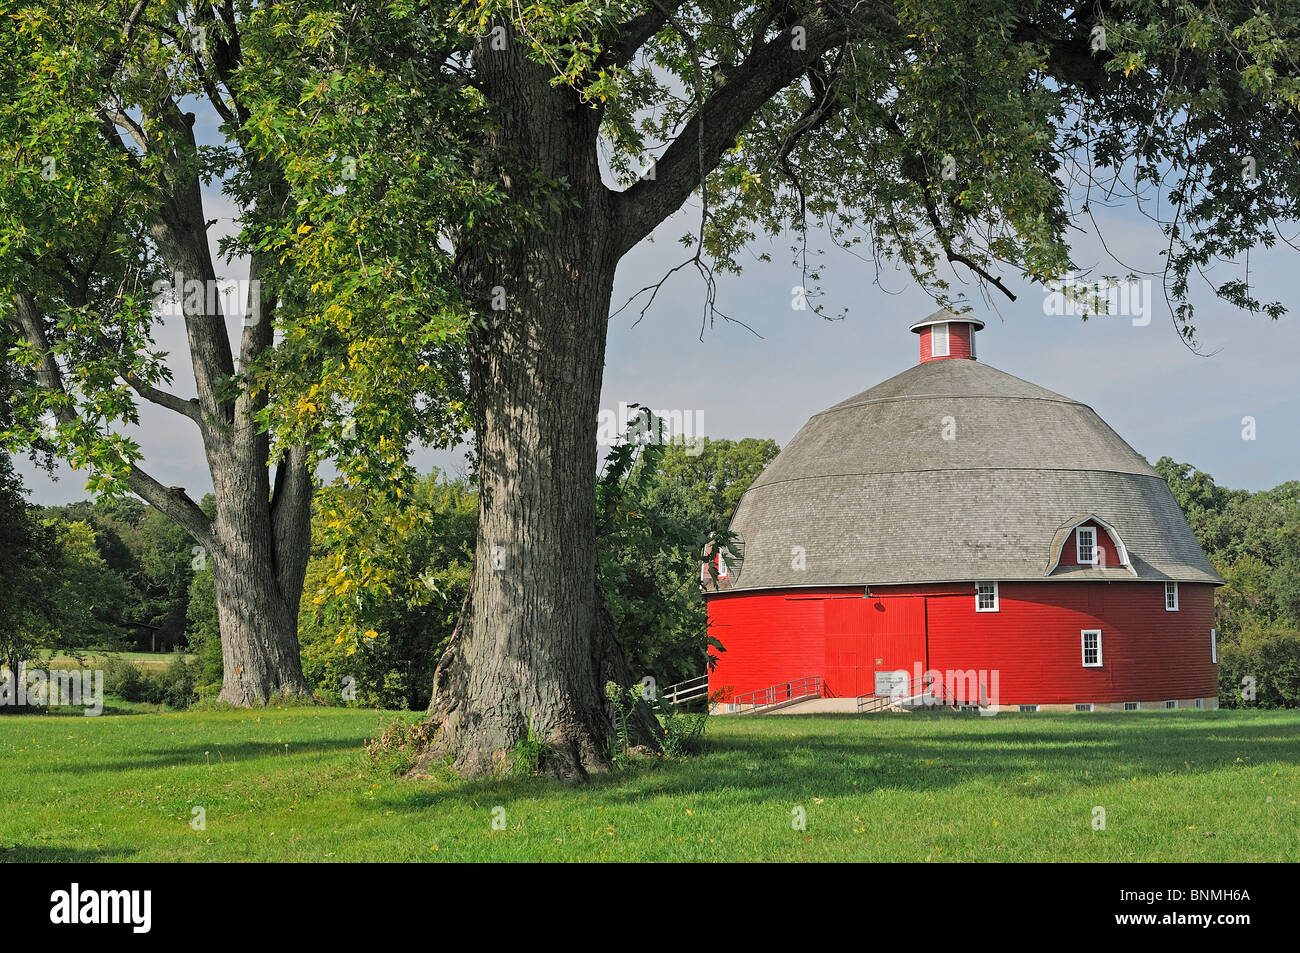 Barn building red round trees outdoors green meadow Johnson Sauk Trail State Park Illinois USA America North America Stock Photo